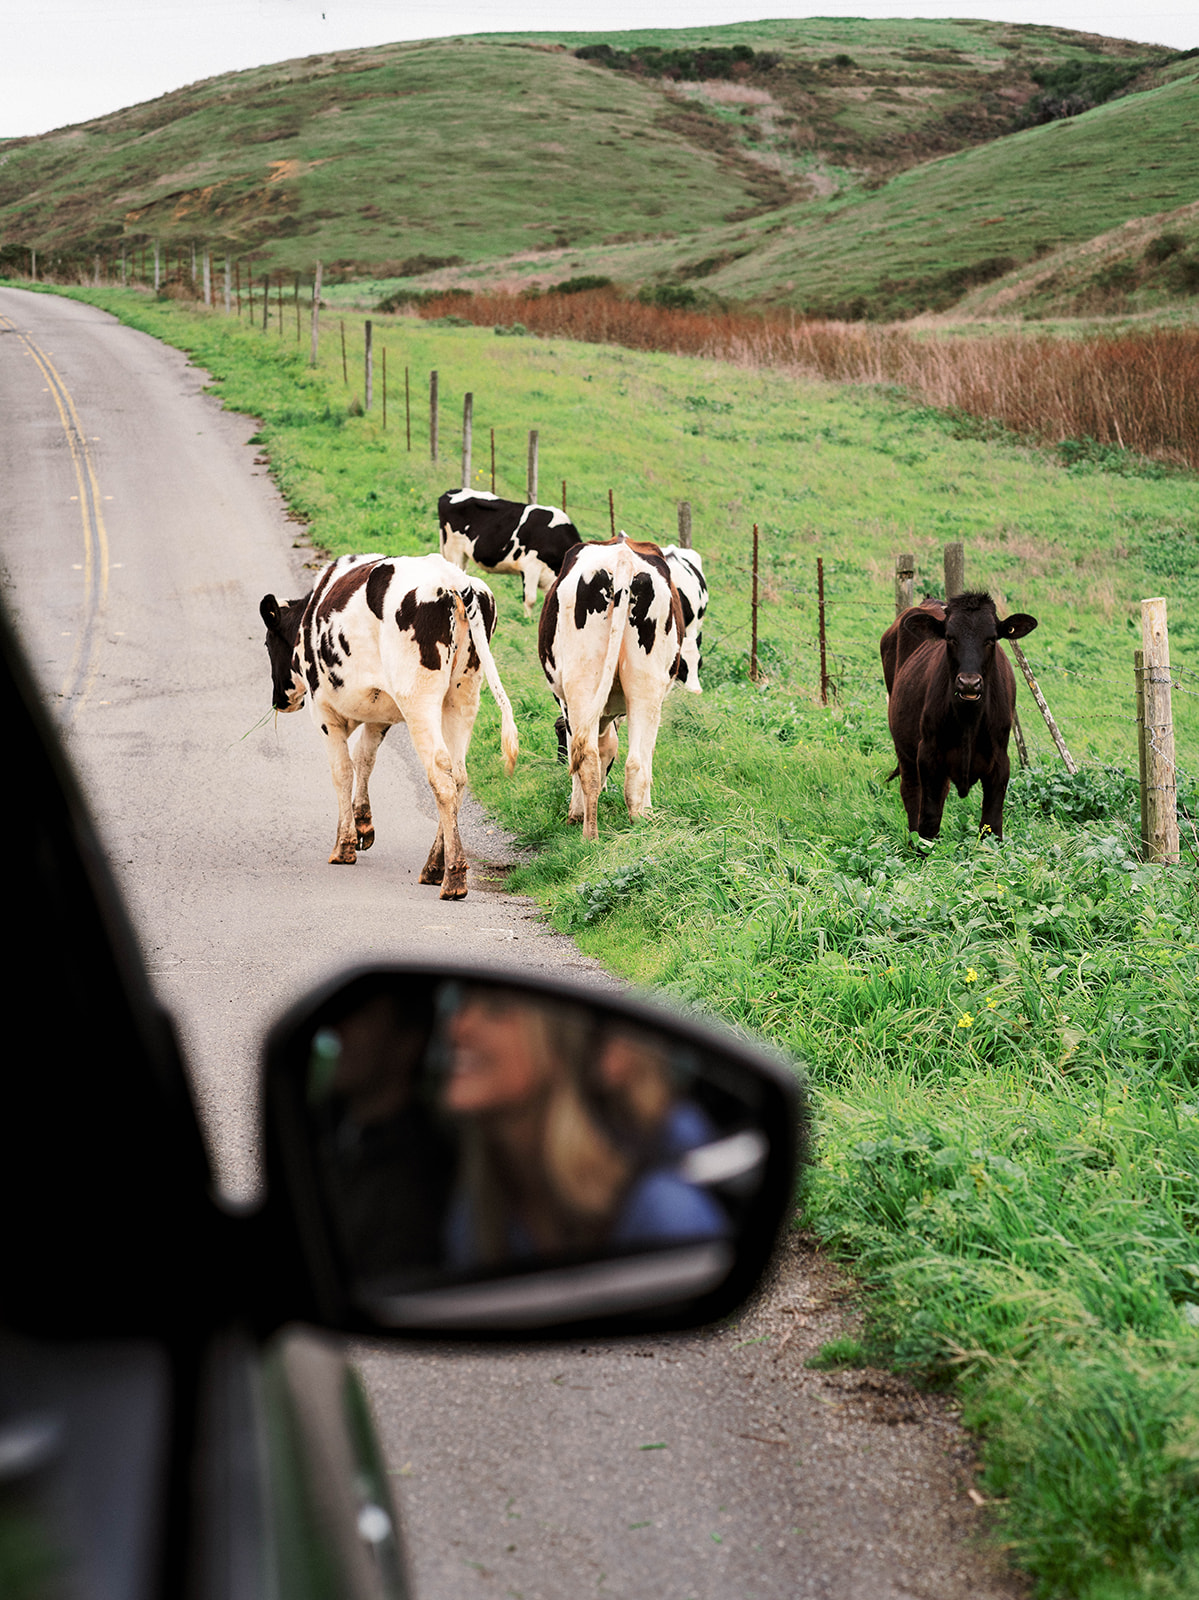 Cows block the way in Marin County.